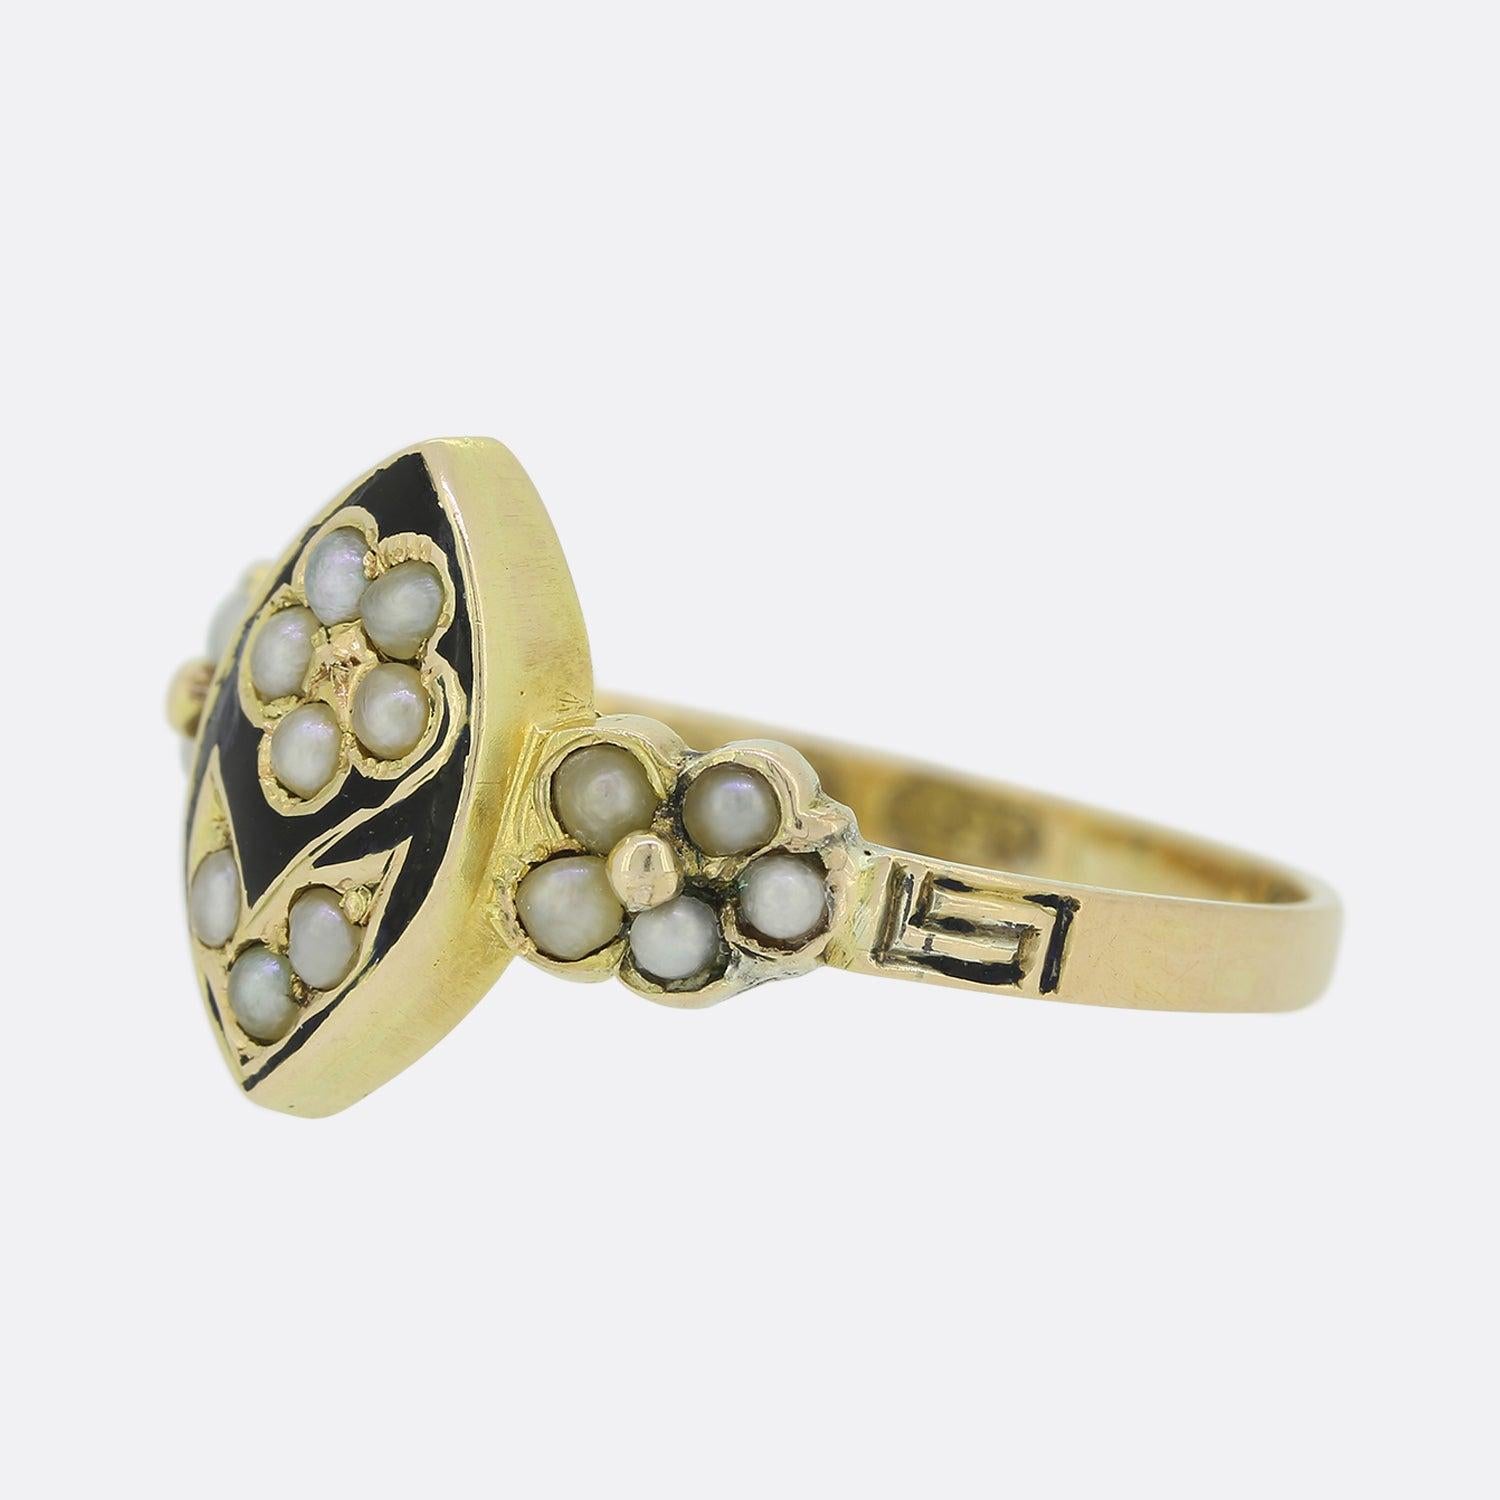 This is a wonderful 15ct yellow gold antique ring. The face is crafted in a navette style and features a flower formed of small seed pearls. Surrounding the daisy there is well kept black enamel which could signify that the ring was original used